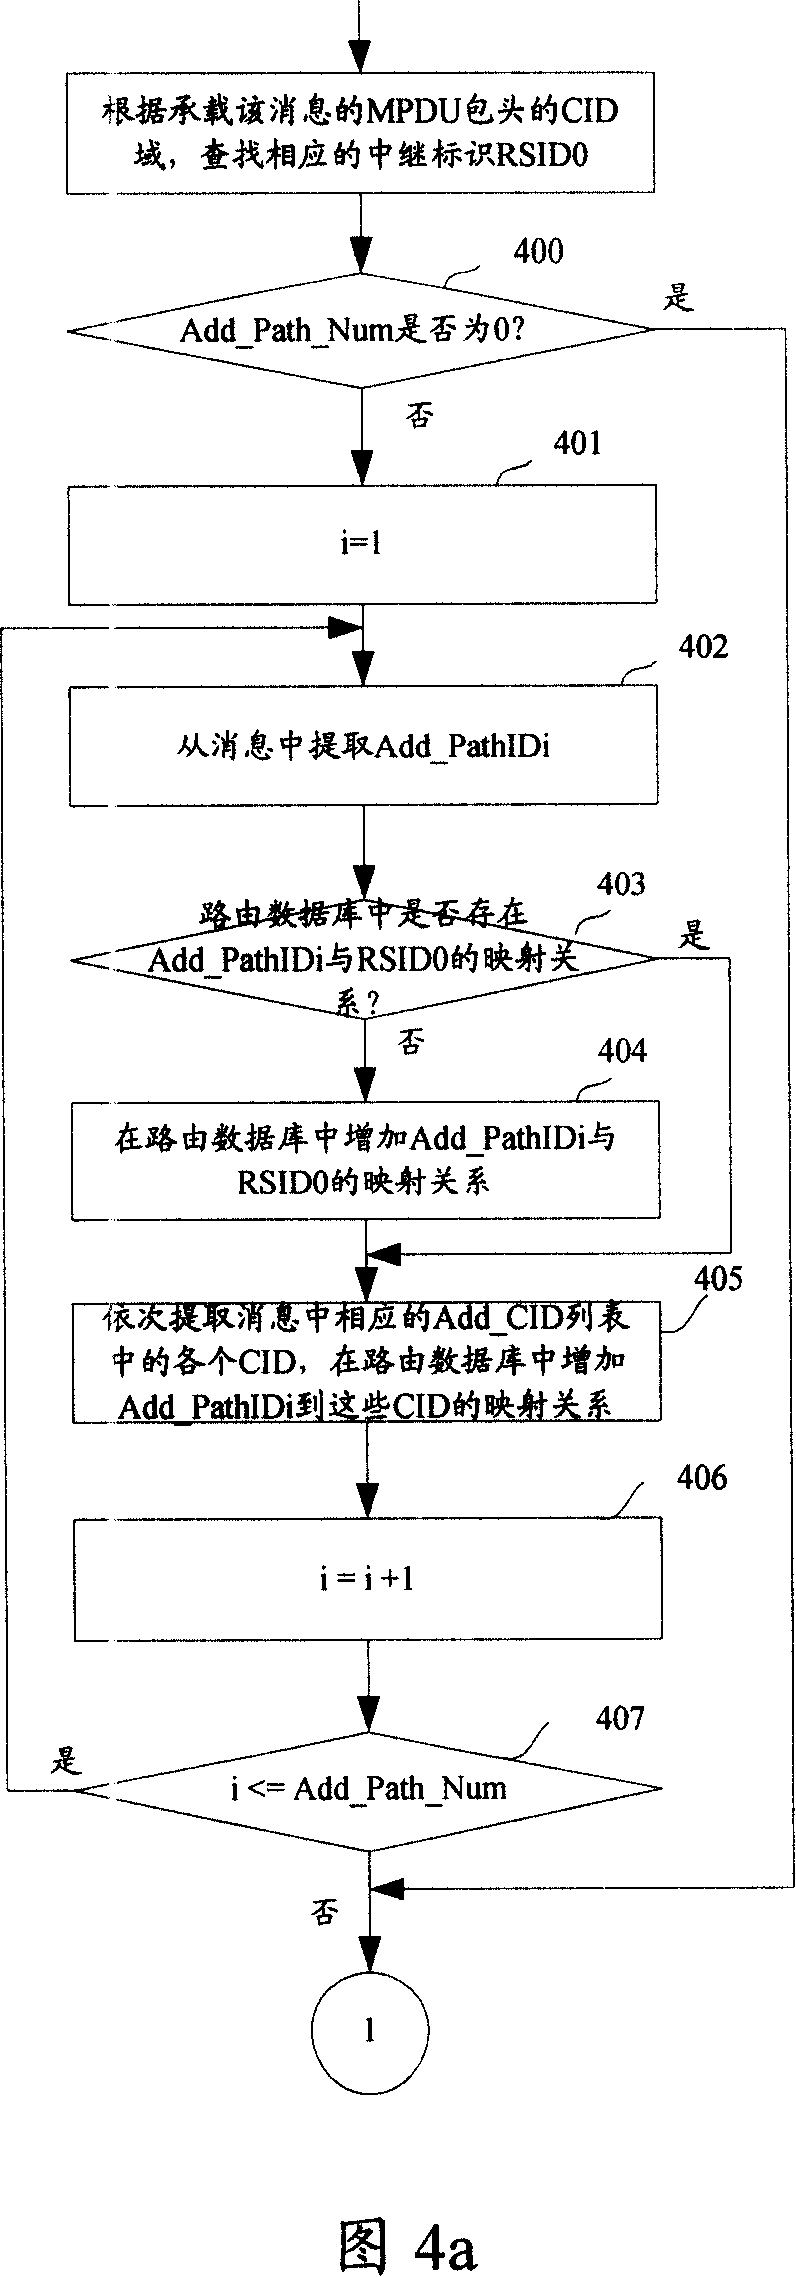 Multi-jumper radio relay communication system and its download data transmission method